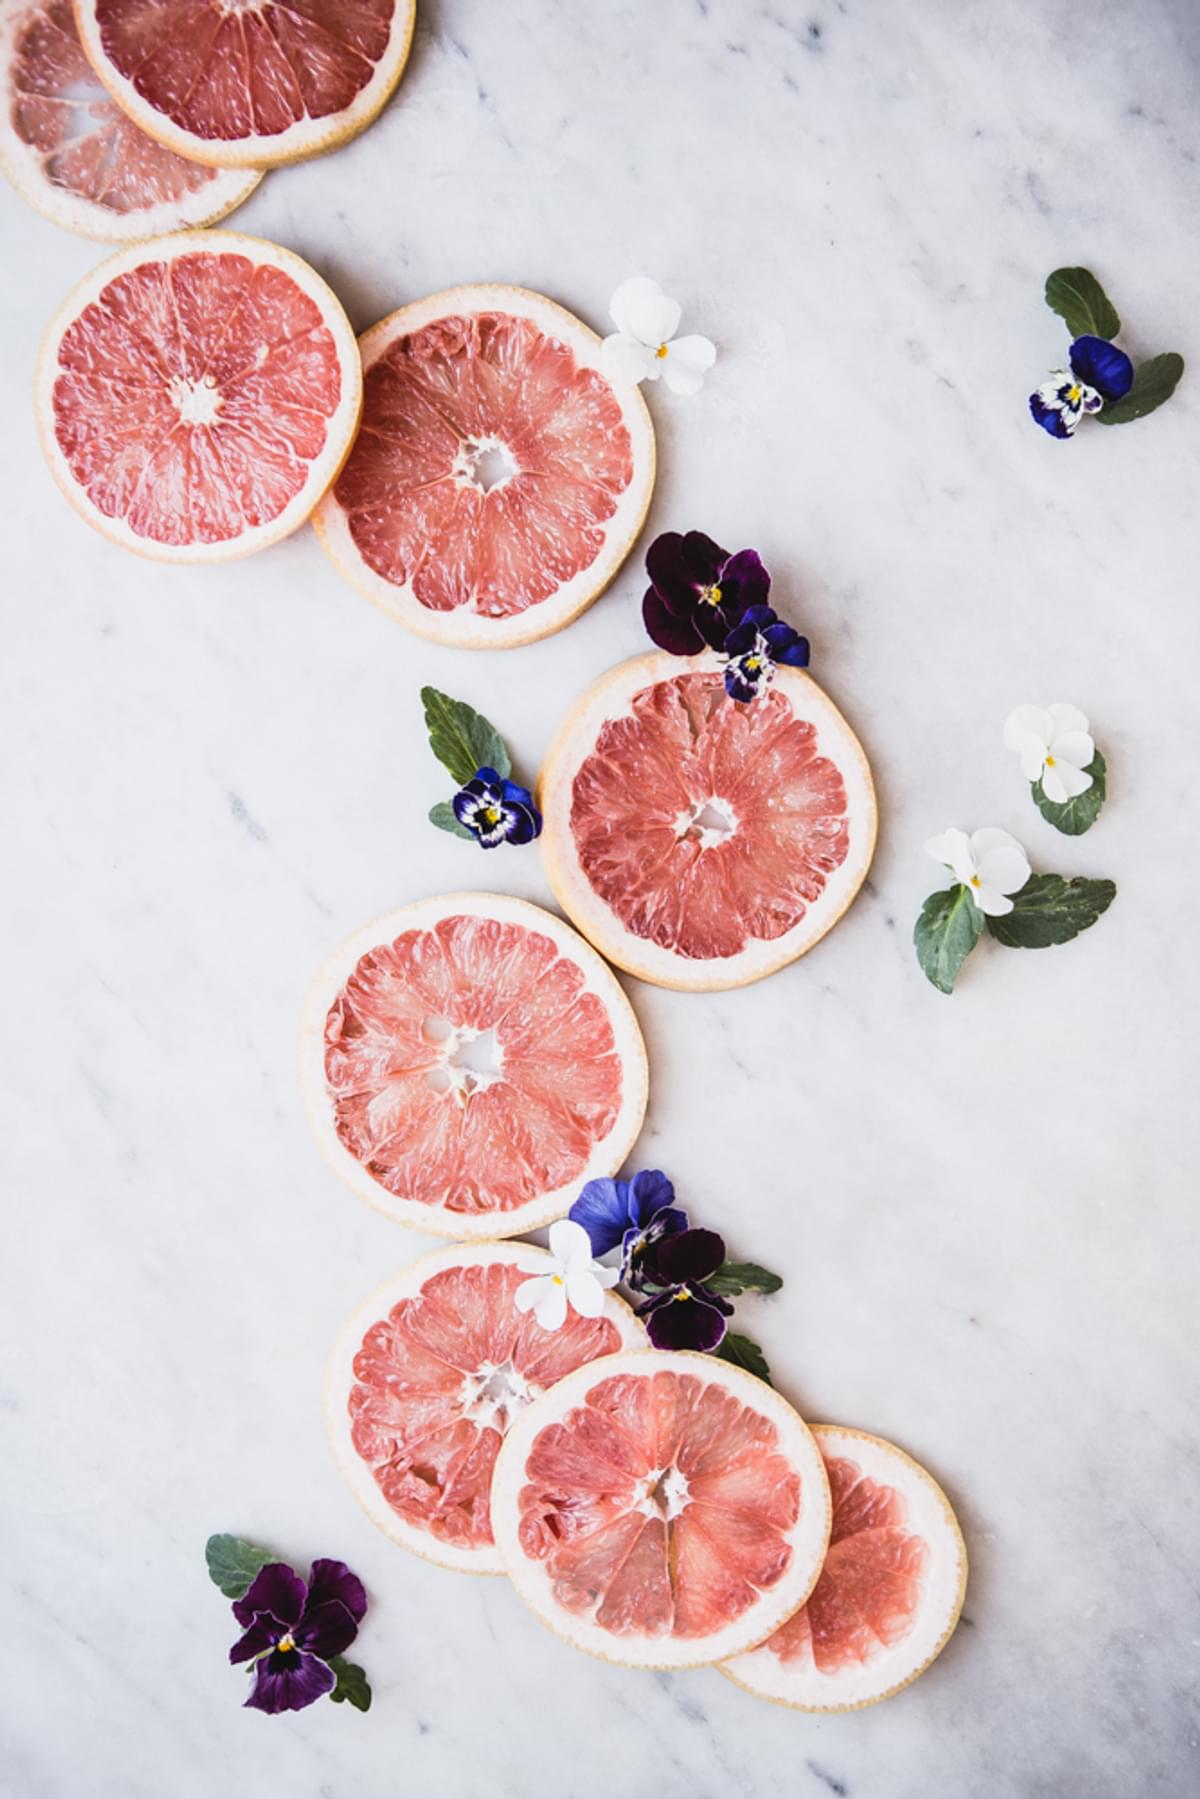 grapefruit slices and pansy flowers